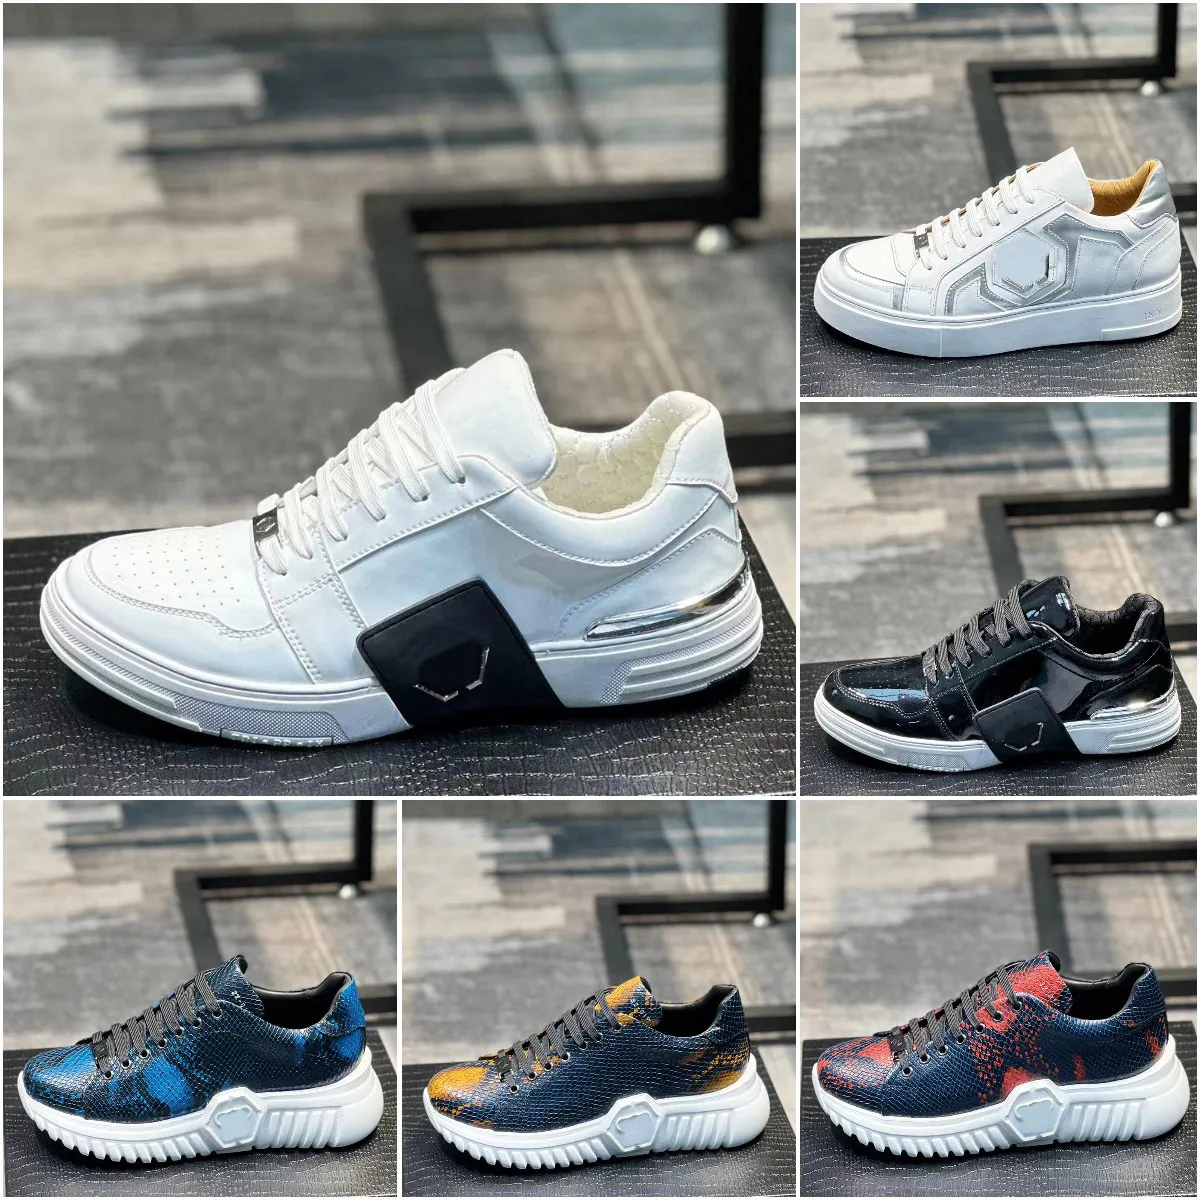 Designers Men HEXAGON LO-TOP SNEAKERS Fashion High quality SUPER STREET LO-TOP SNEAKERS Leather Casual sports shoes Size 38-45